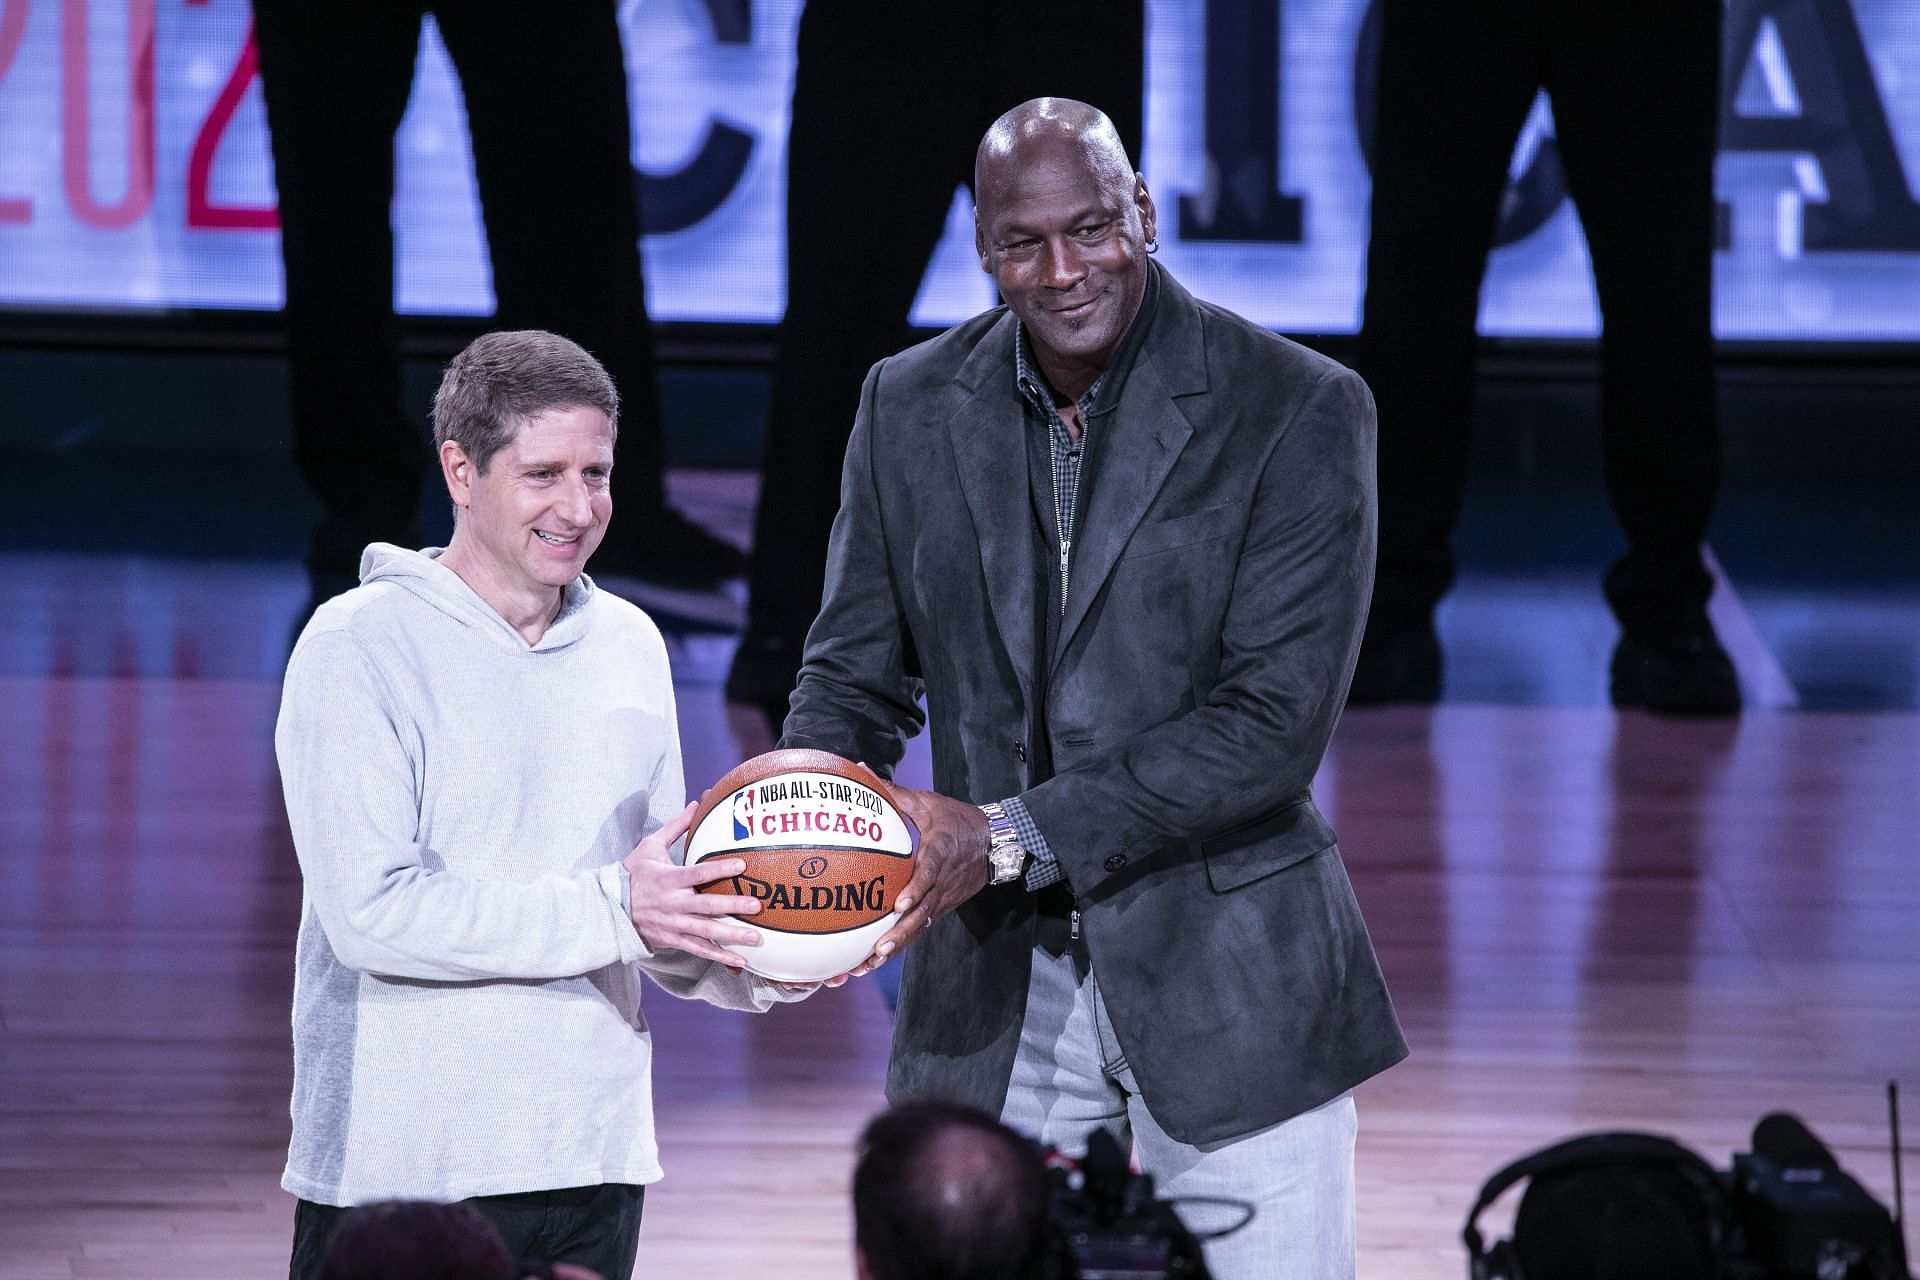 Chicago Bulls President/COO Michael Reinsdorf Jr. (L) accepts the ceremonial All-Star ball from Charlotte Hornets Chairman Michael Jordan at the 68th NBA All-Star Game on February 17, 2019 in Charlotte, North Carolina.